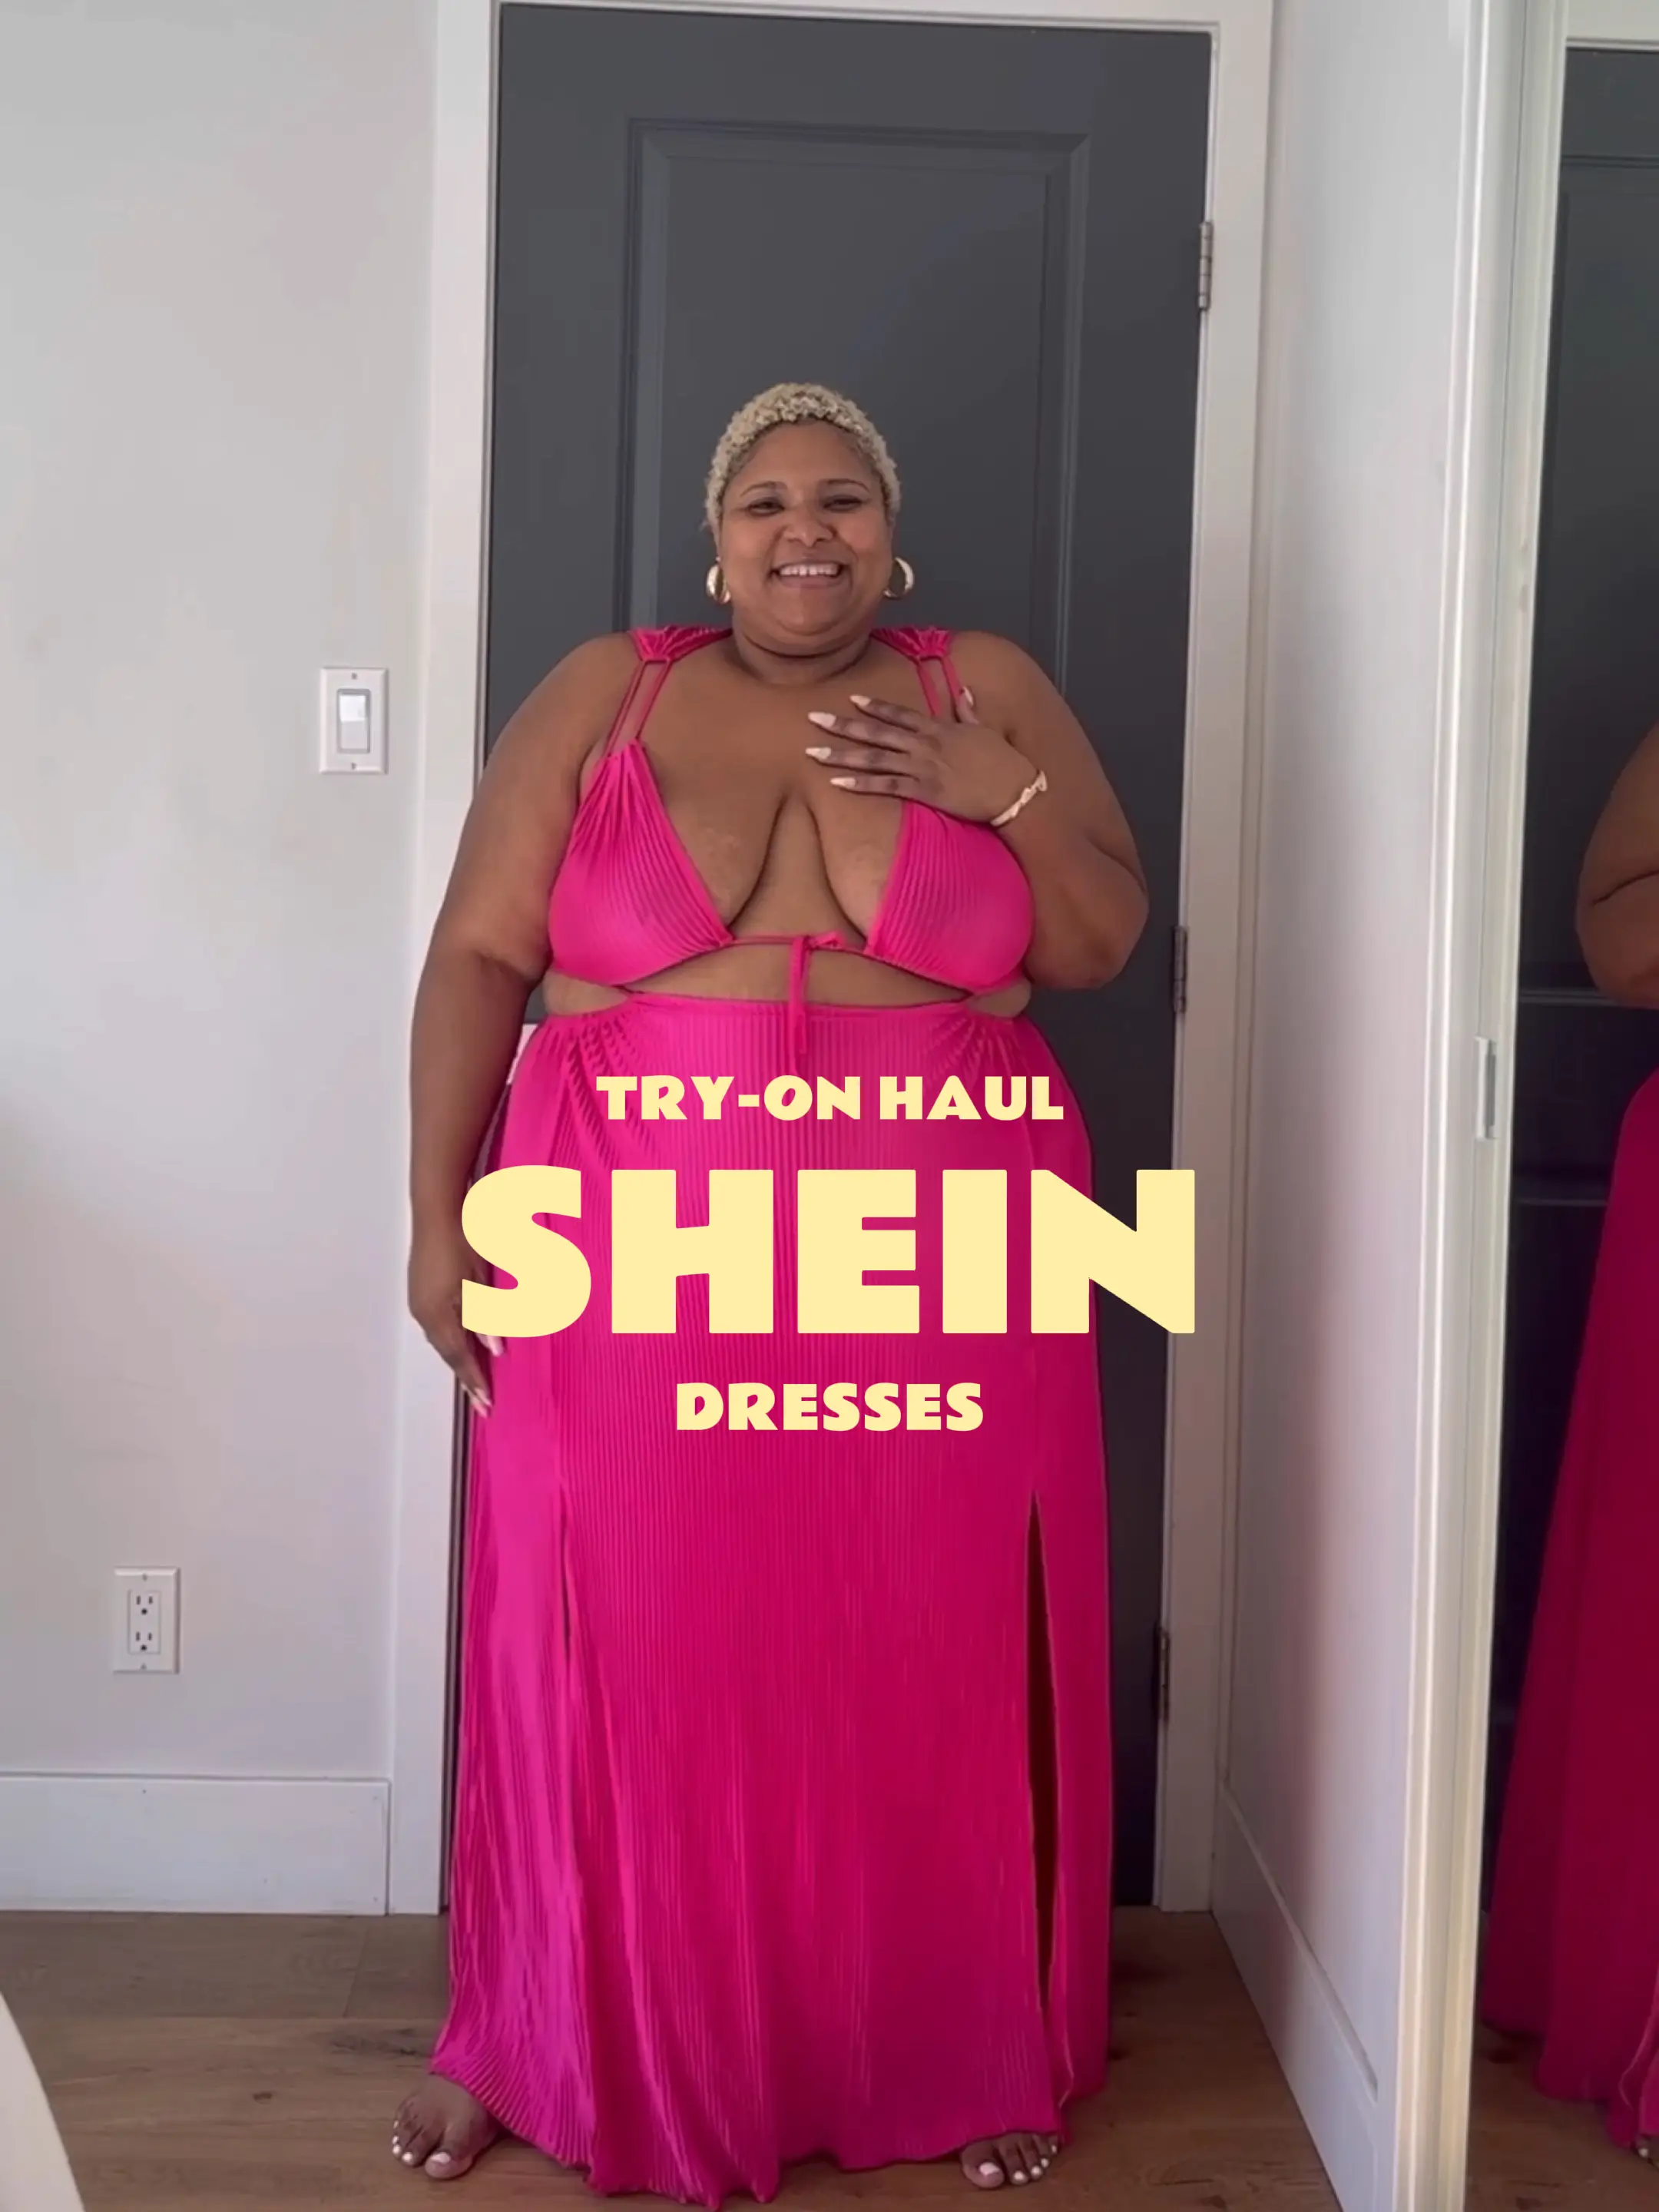 SHEIN TRY-ON HAUL, DRESSES, Video published by Kaseywithakayy